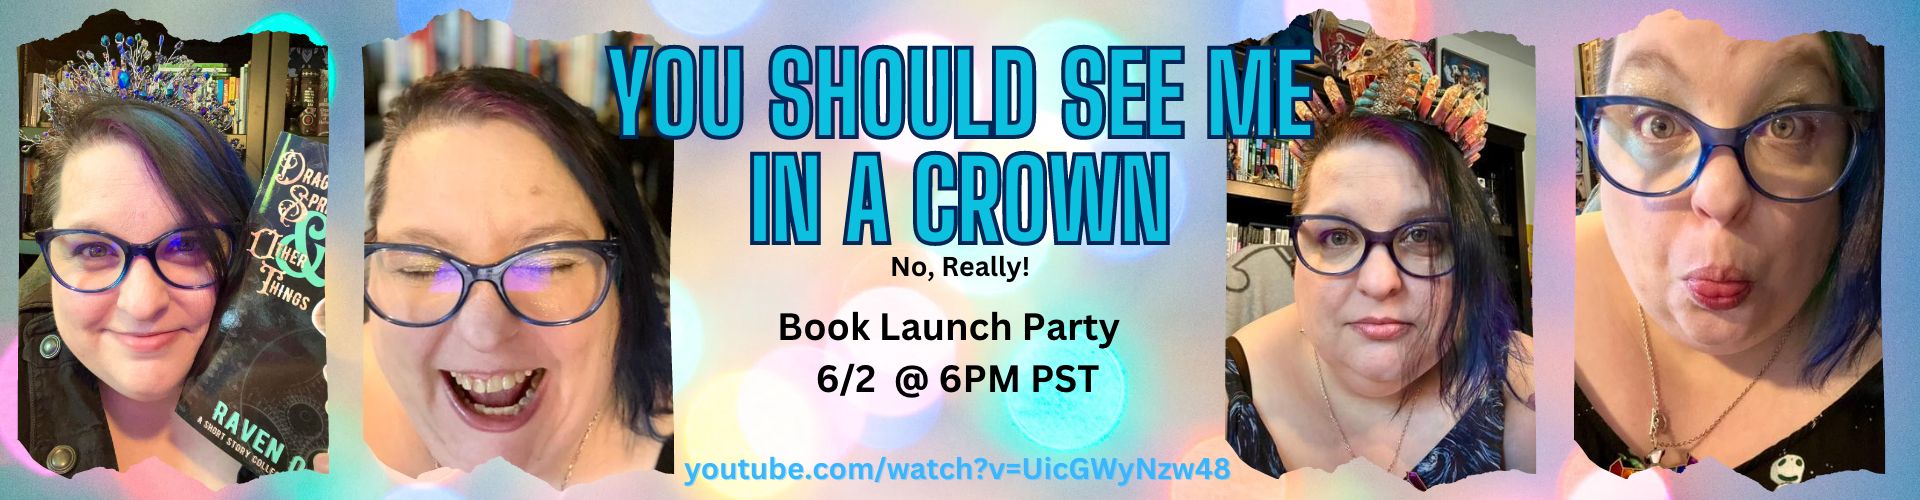 Come see Raven in a crown at her book release party at https://www.youtube.com/watch?v=UicGWyNzw48